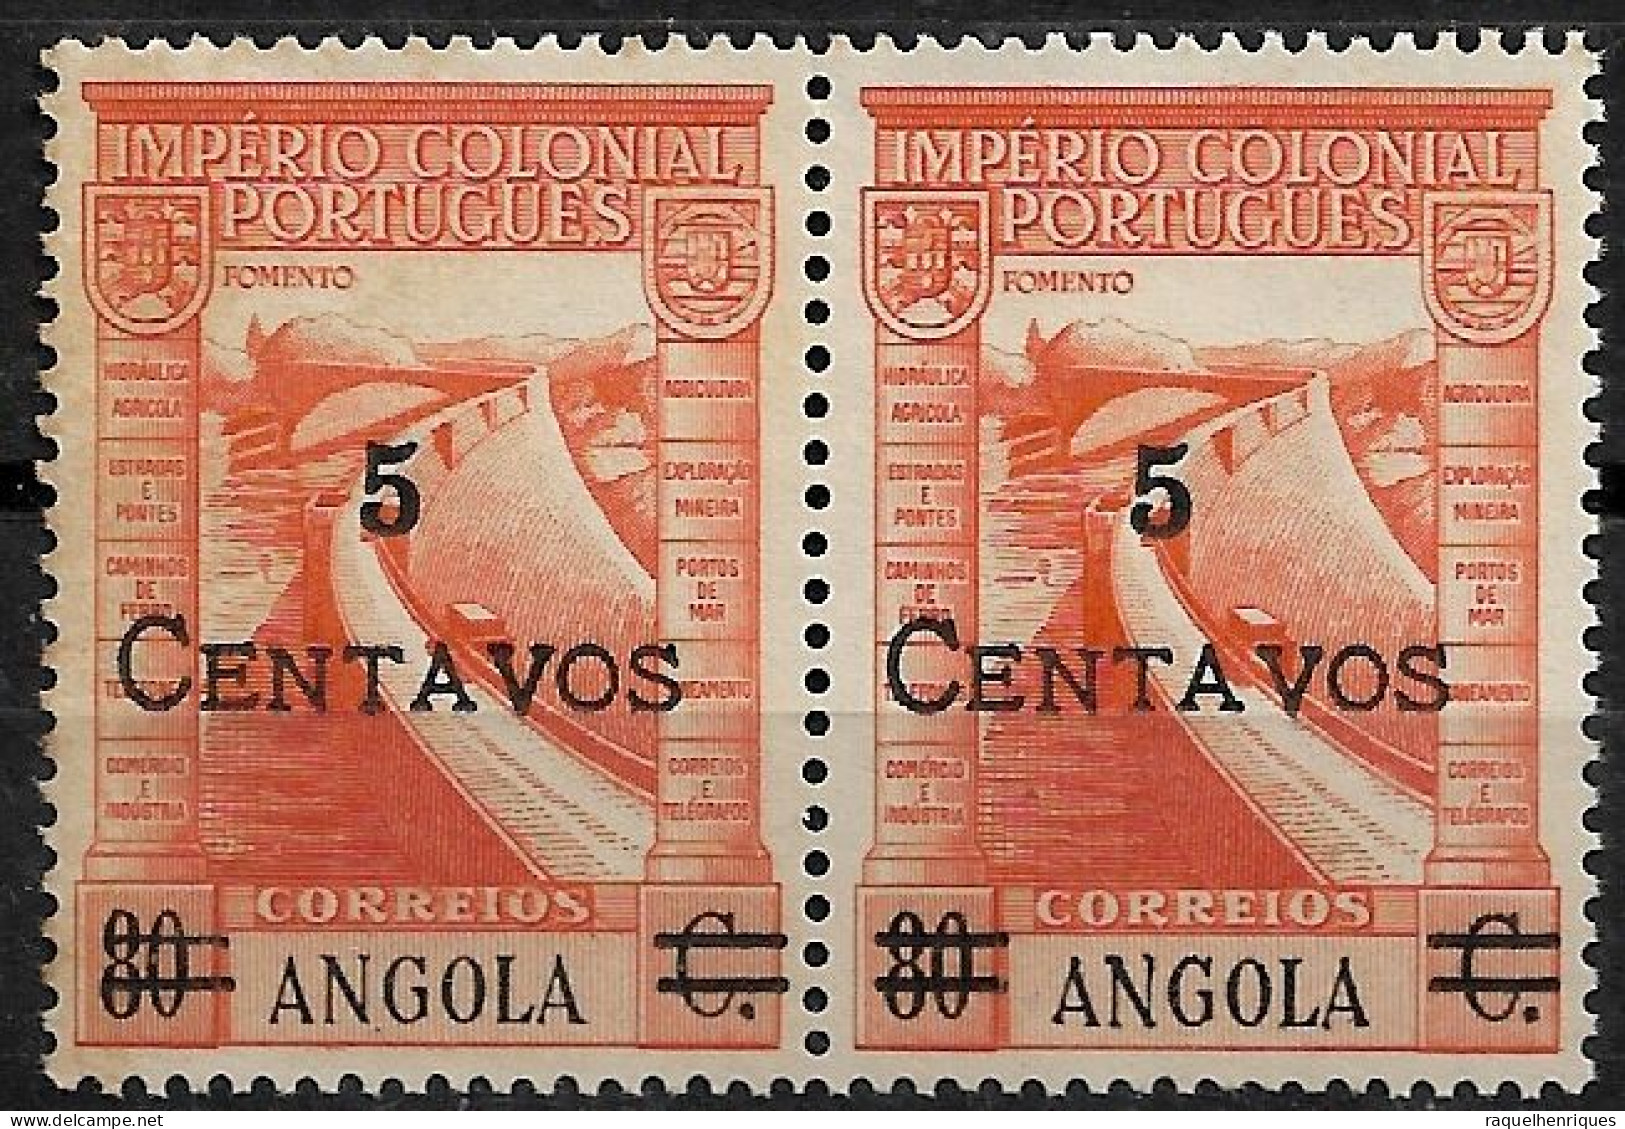 ANGOLA 1945 ISSUE OF 1938 SURCHARGED - PAIR MNH (NP#71-P04-L1) - Angola